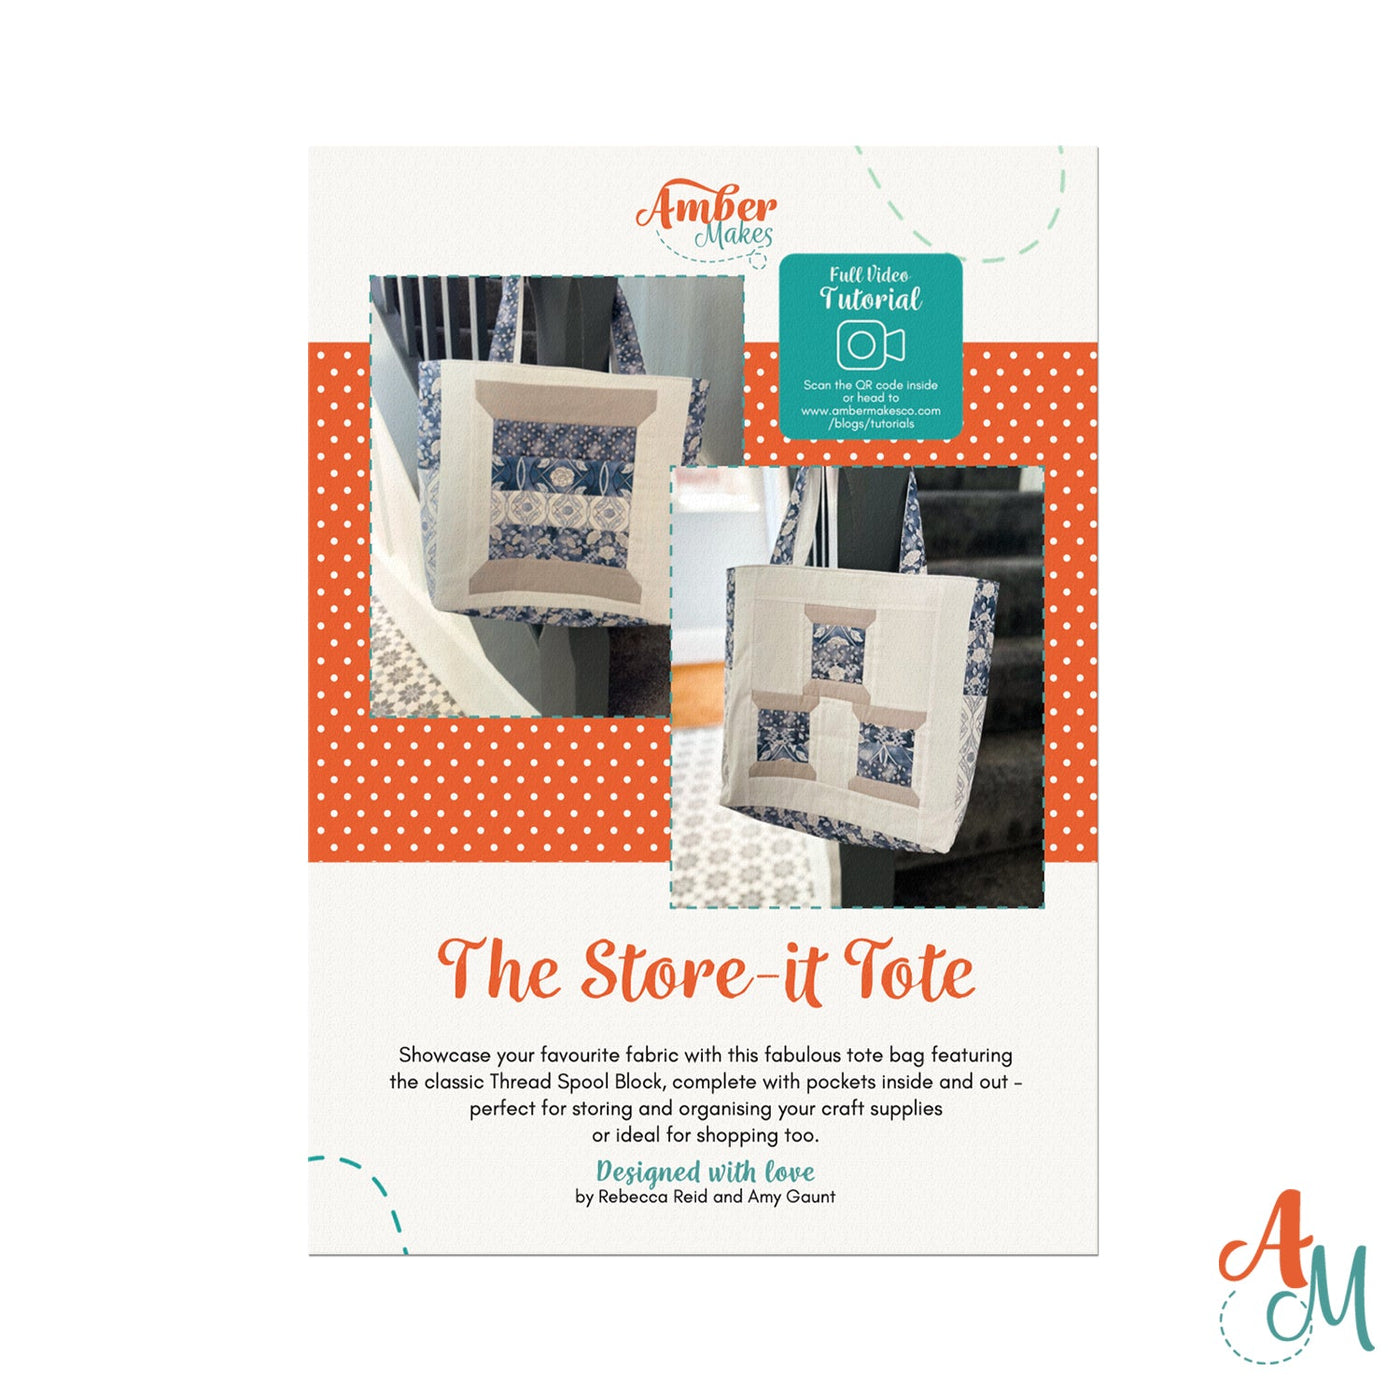 The Store-it Tote - PDF Download Instructions Booklet